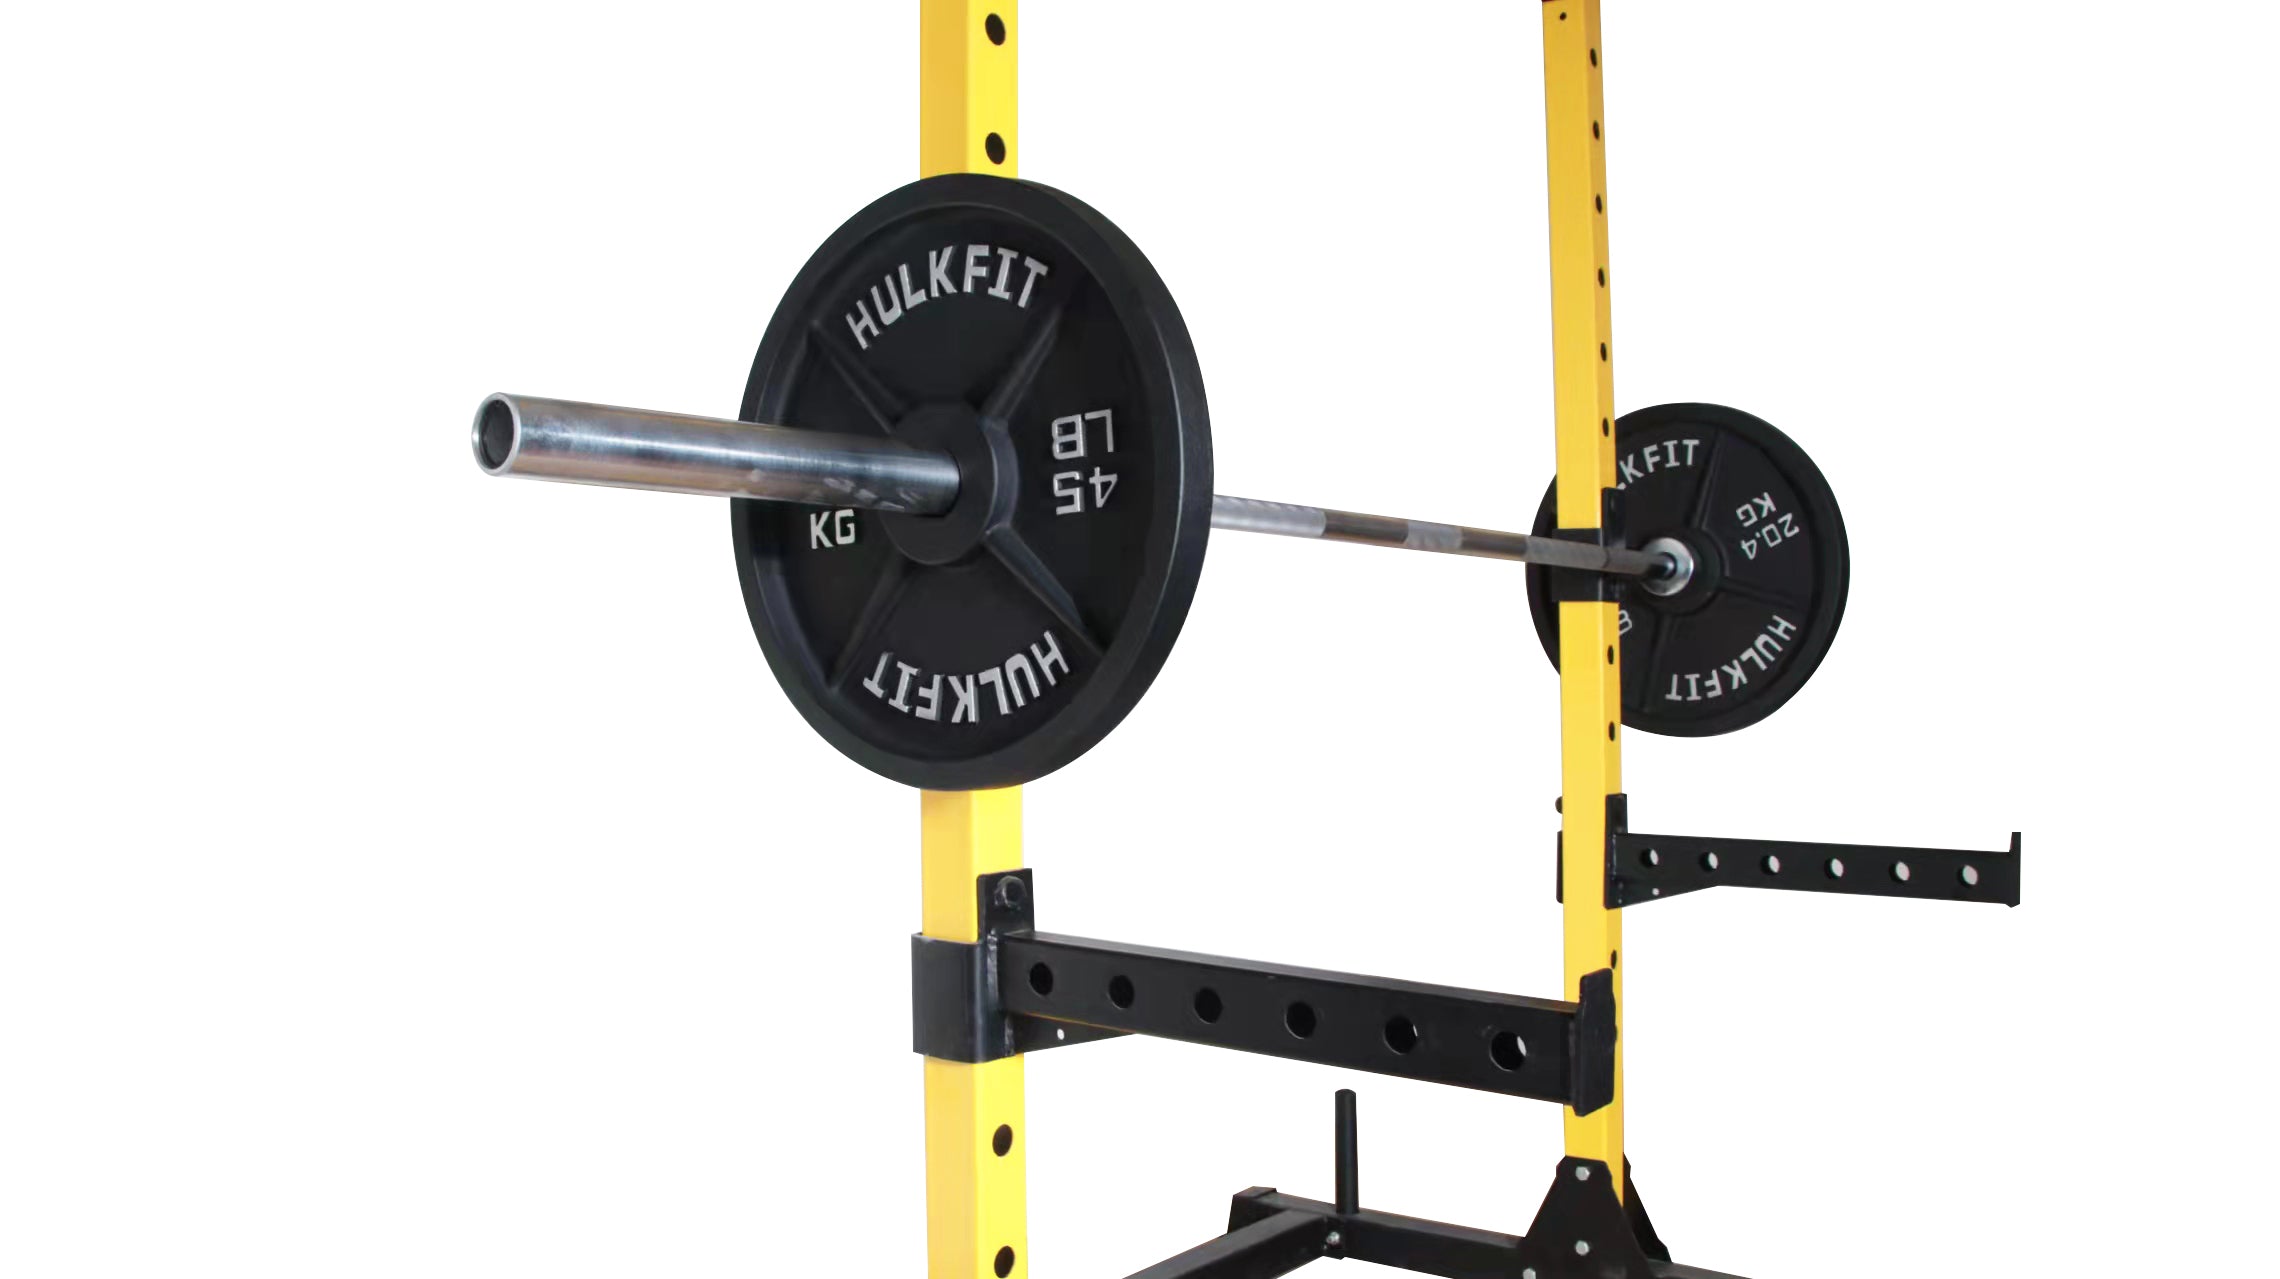 Gym; Home Gym; Garage Gym; Sports; Workout; Strength & Conditioning; Strength Training; Powerlifting; Olympic Weightlifting; Strongman; Weight Plates; Bumper Plates; Olympic Barbell; Olympic Plates